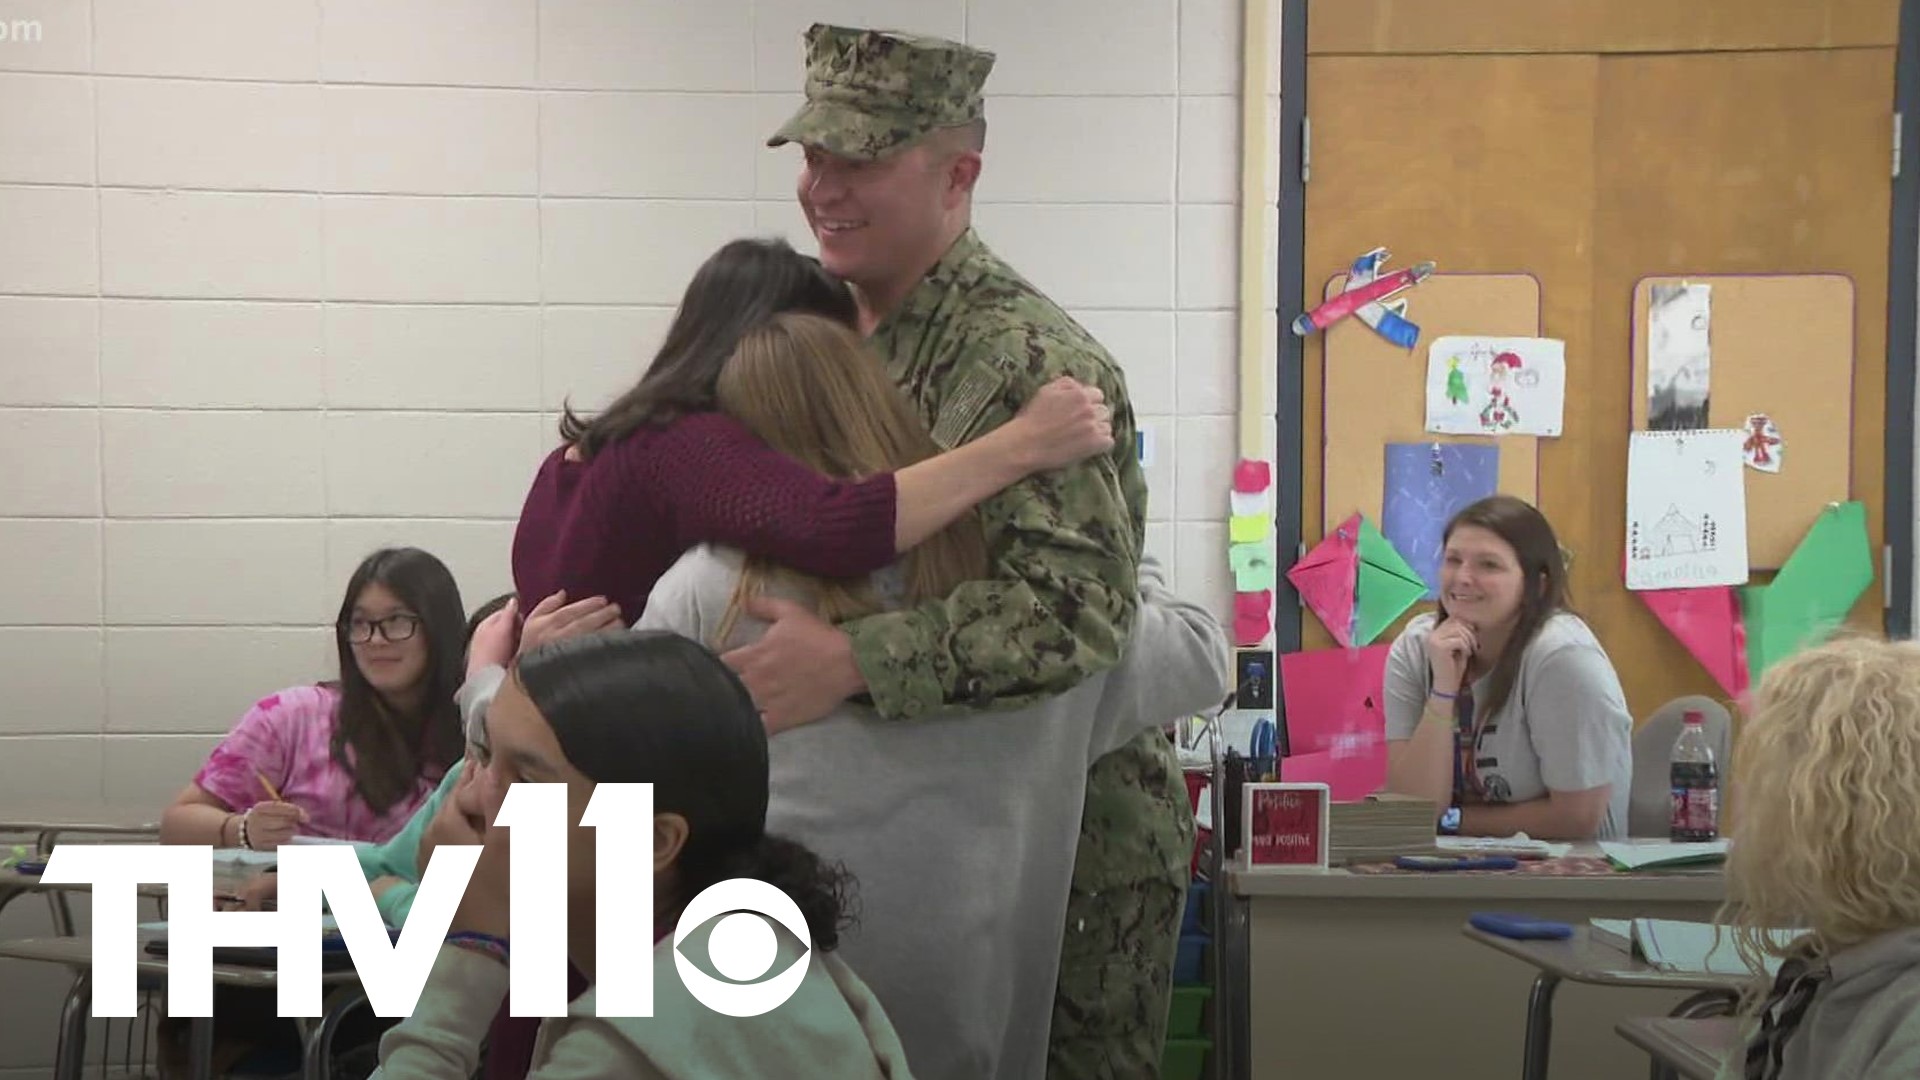 For one Searcy dad in the Navy, he's back home with his family after an emotional homecoming to surprise his daughter at school.